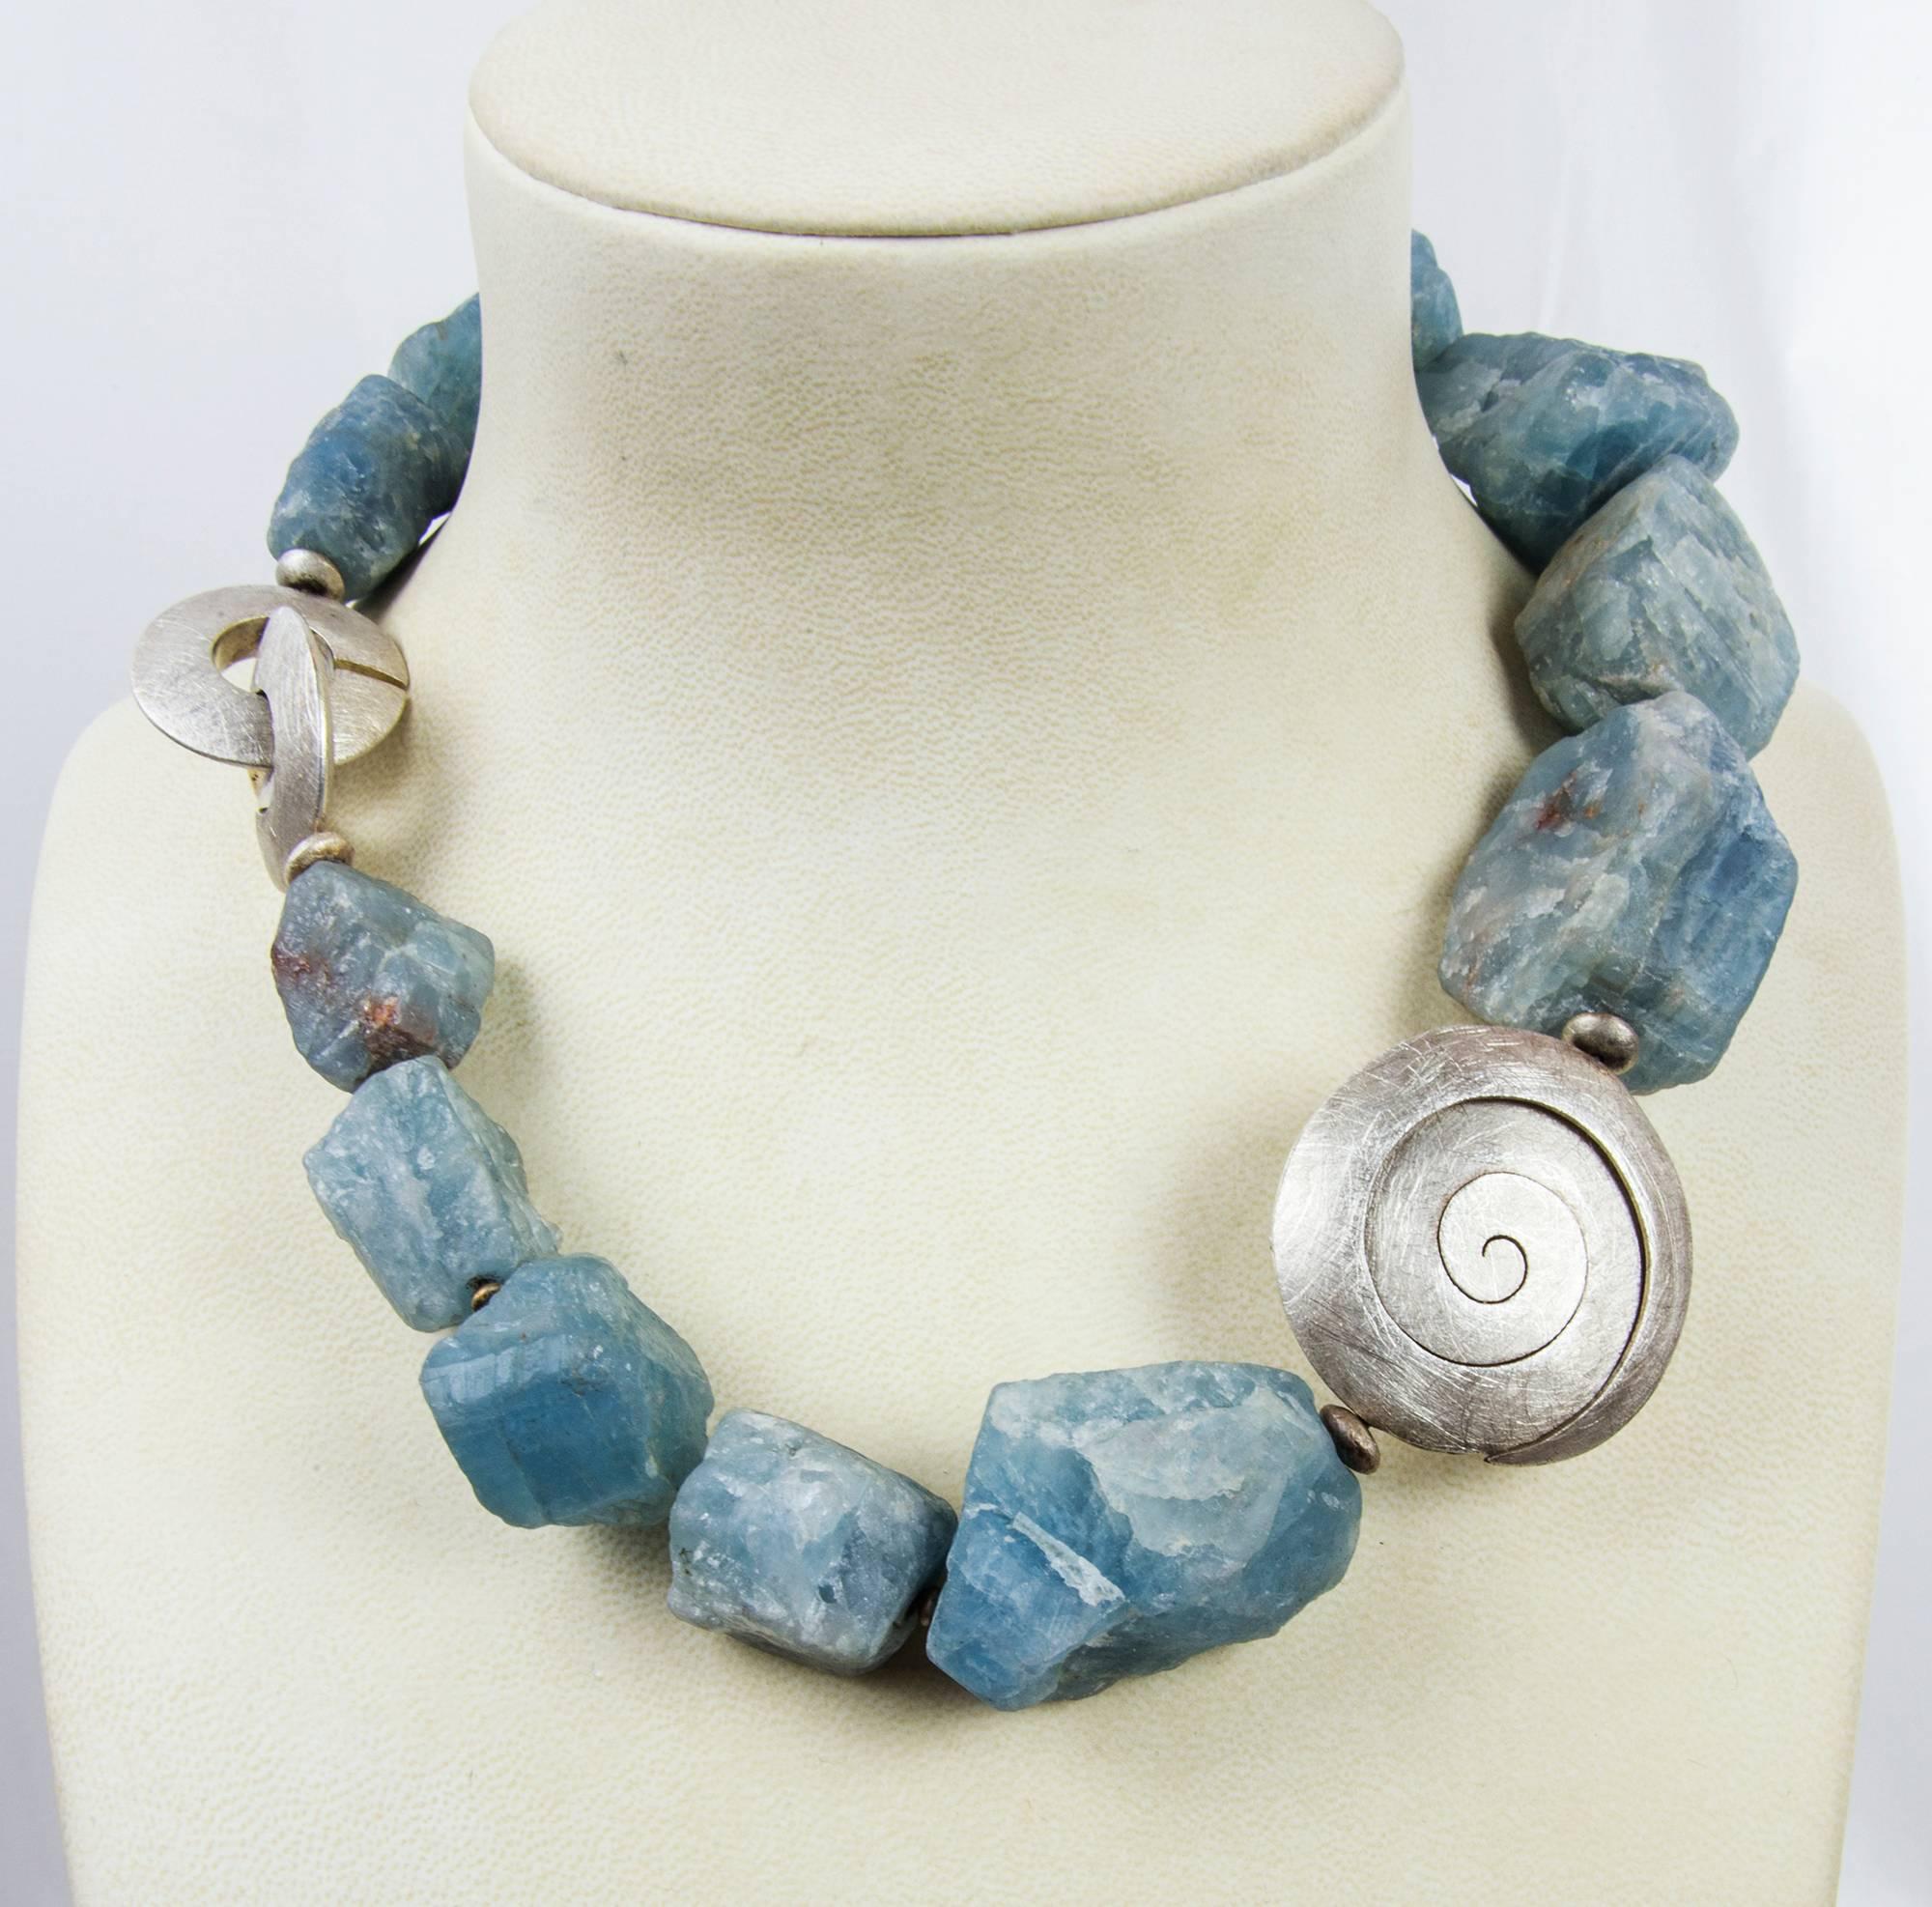 Large graduated Natural organic Aquamarine nuggets, accented with a large textured Sterling Silver swirl rondelle, inter-spaced with S/S spacers and held by a round S/S textured clasp comprising this mesmerizing necklace. Approx. necklace length